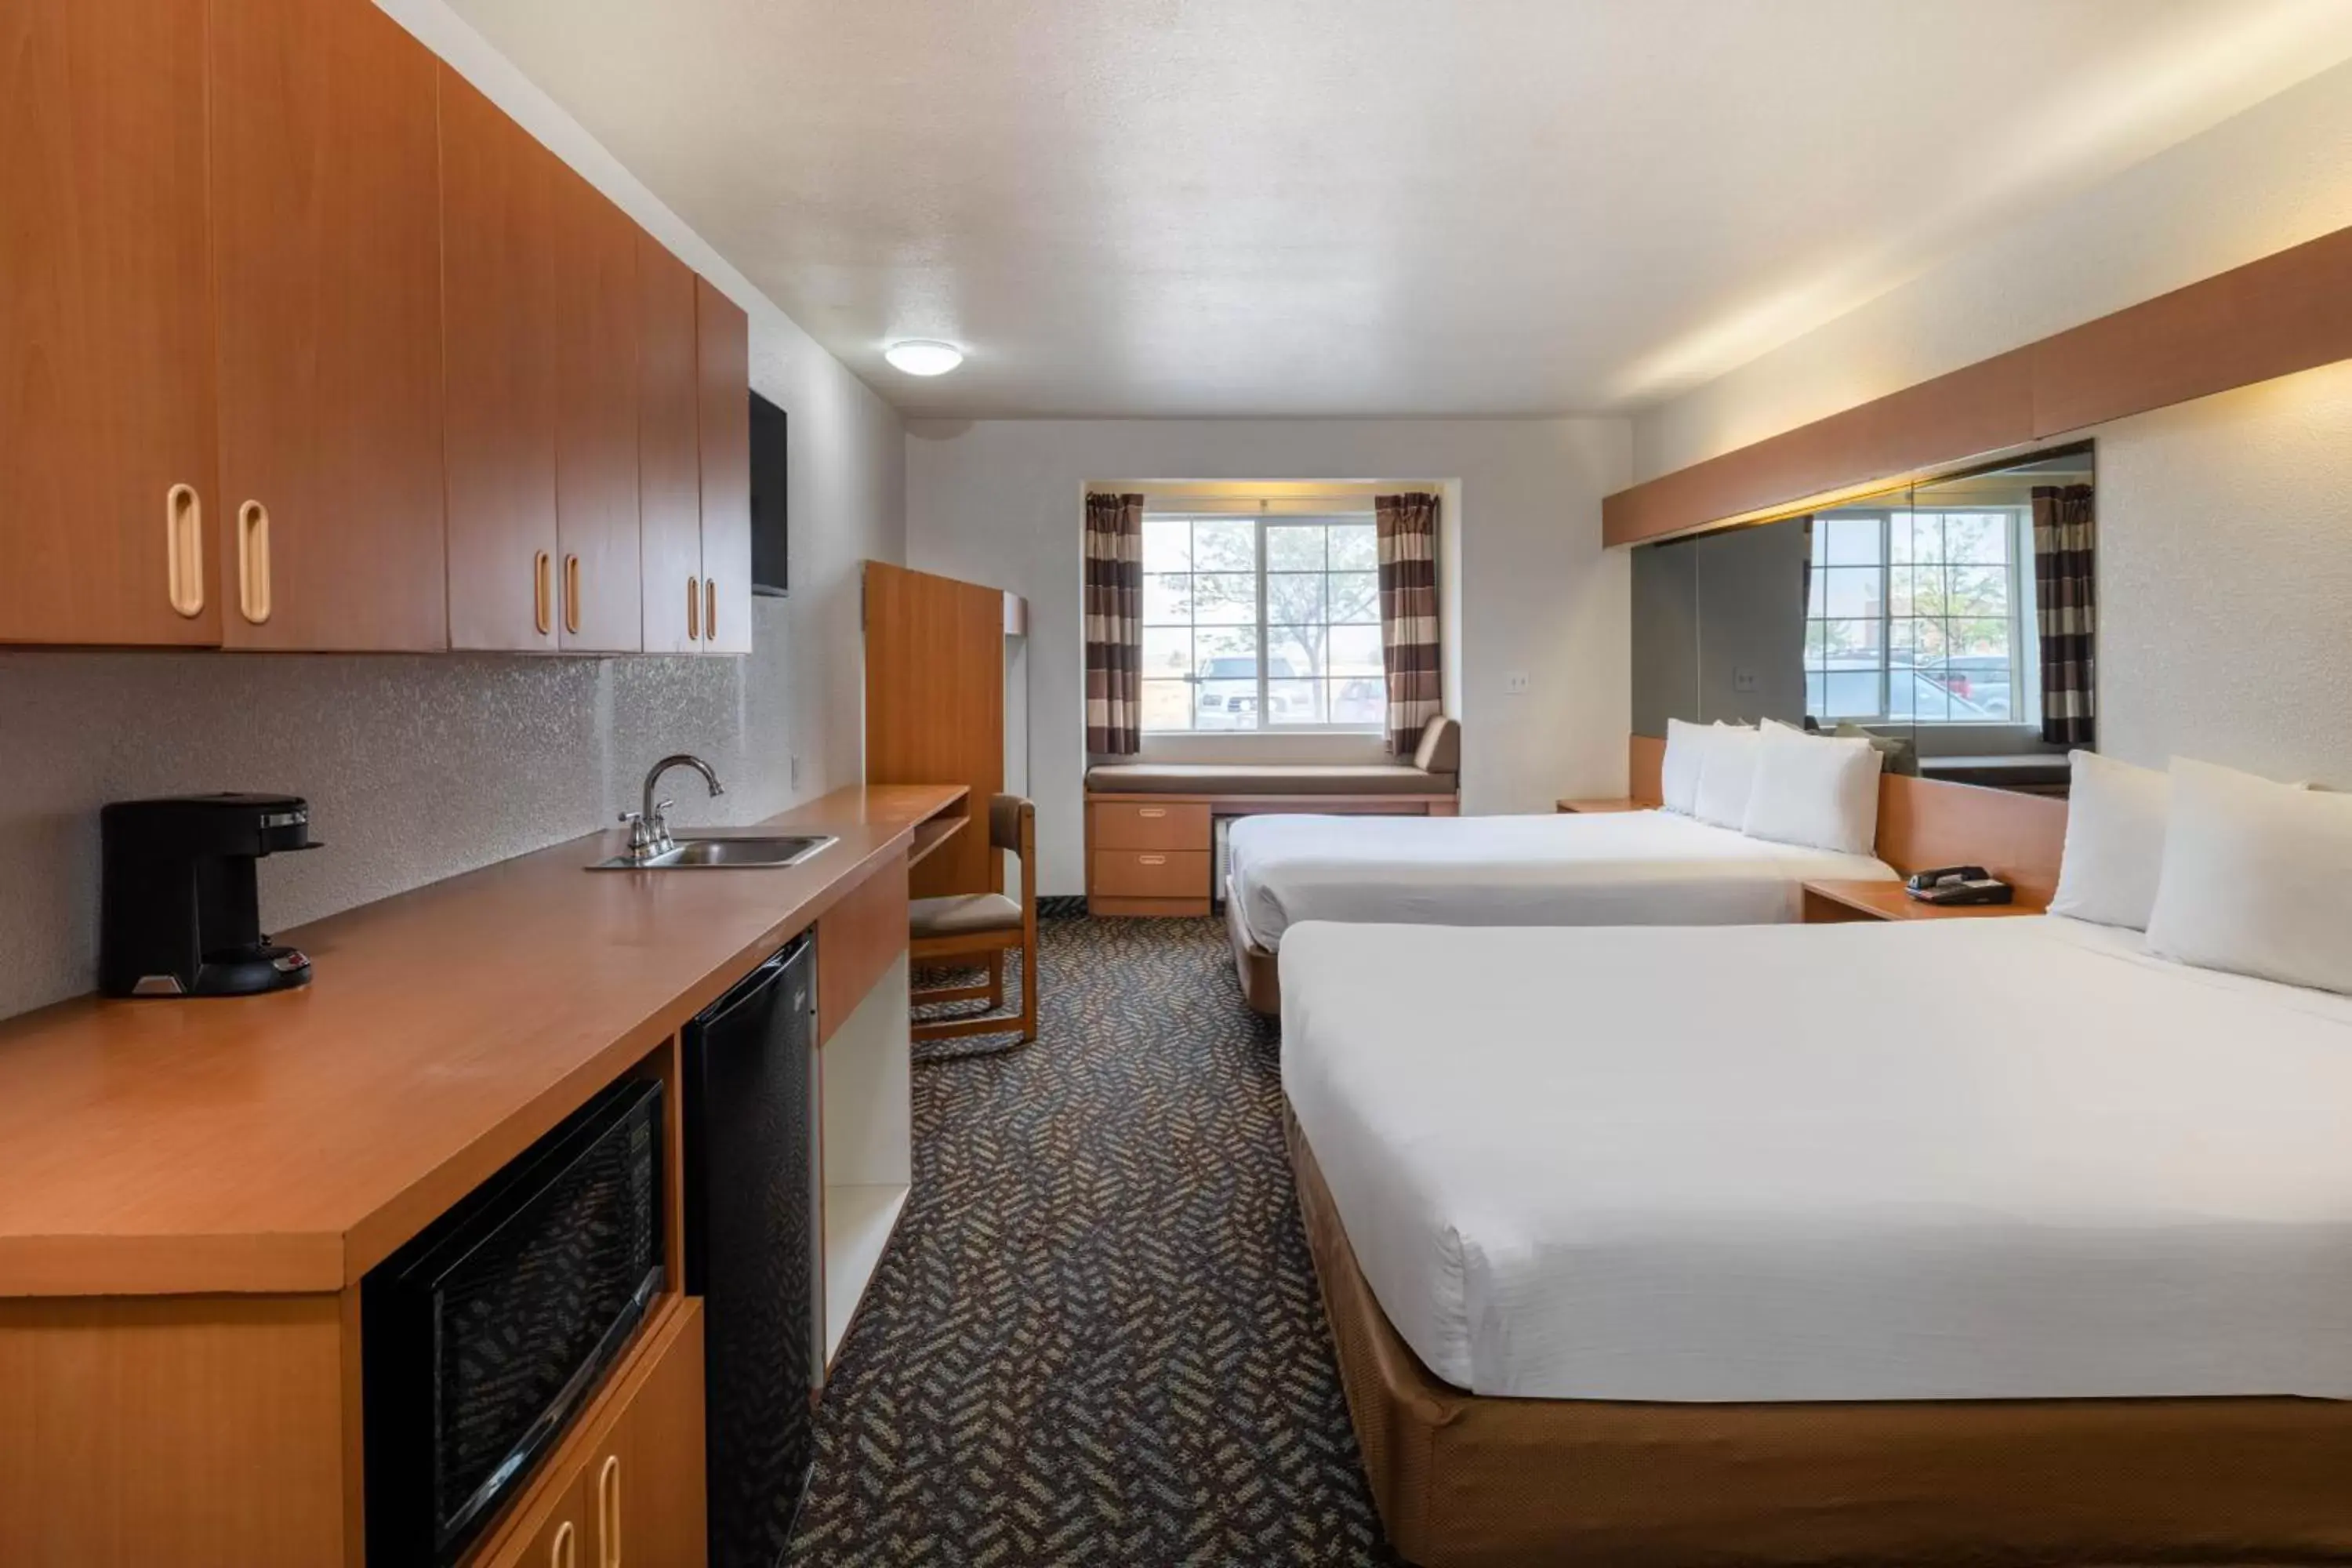 Kitchen or kitchenette in Microtel Inn & Suites by Wyndham Salt Lake City Airport